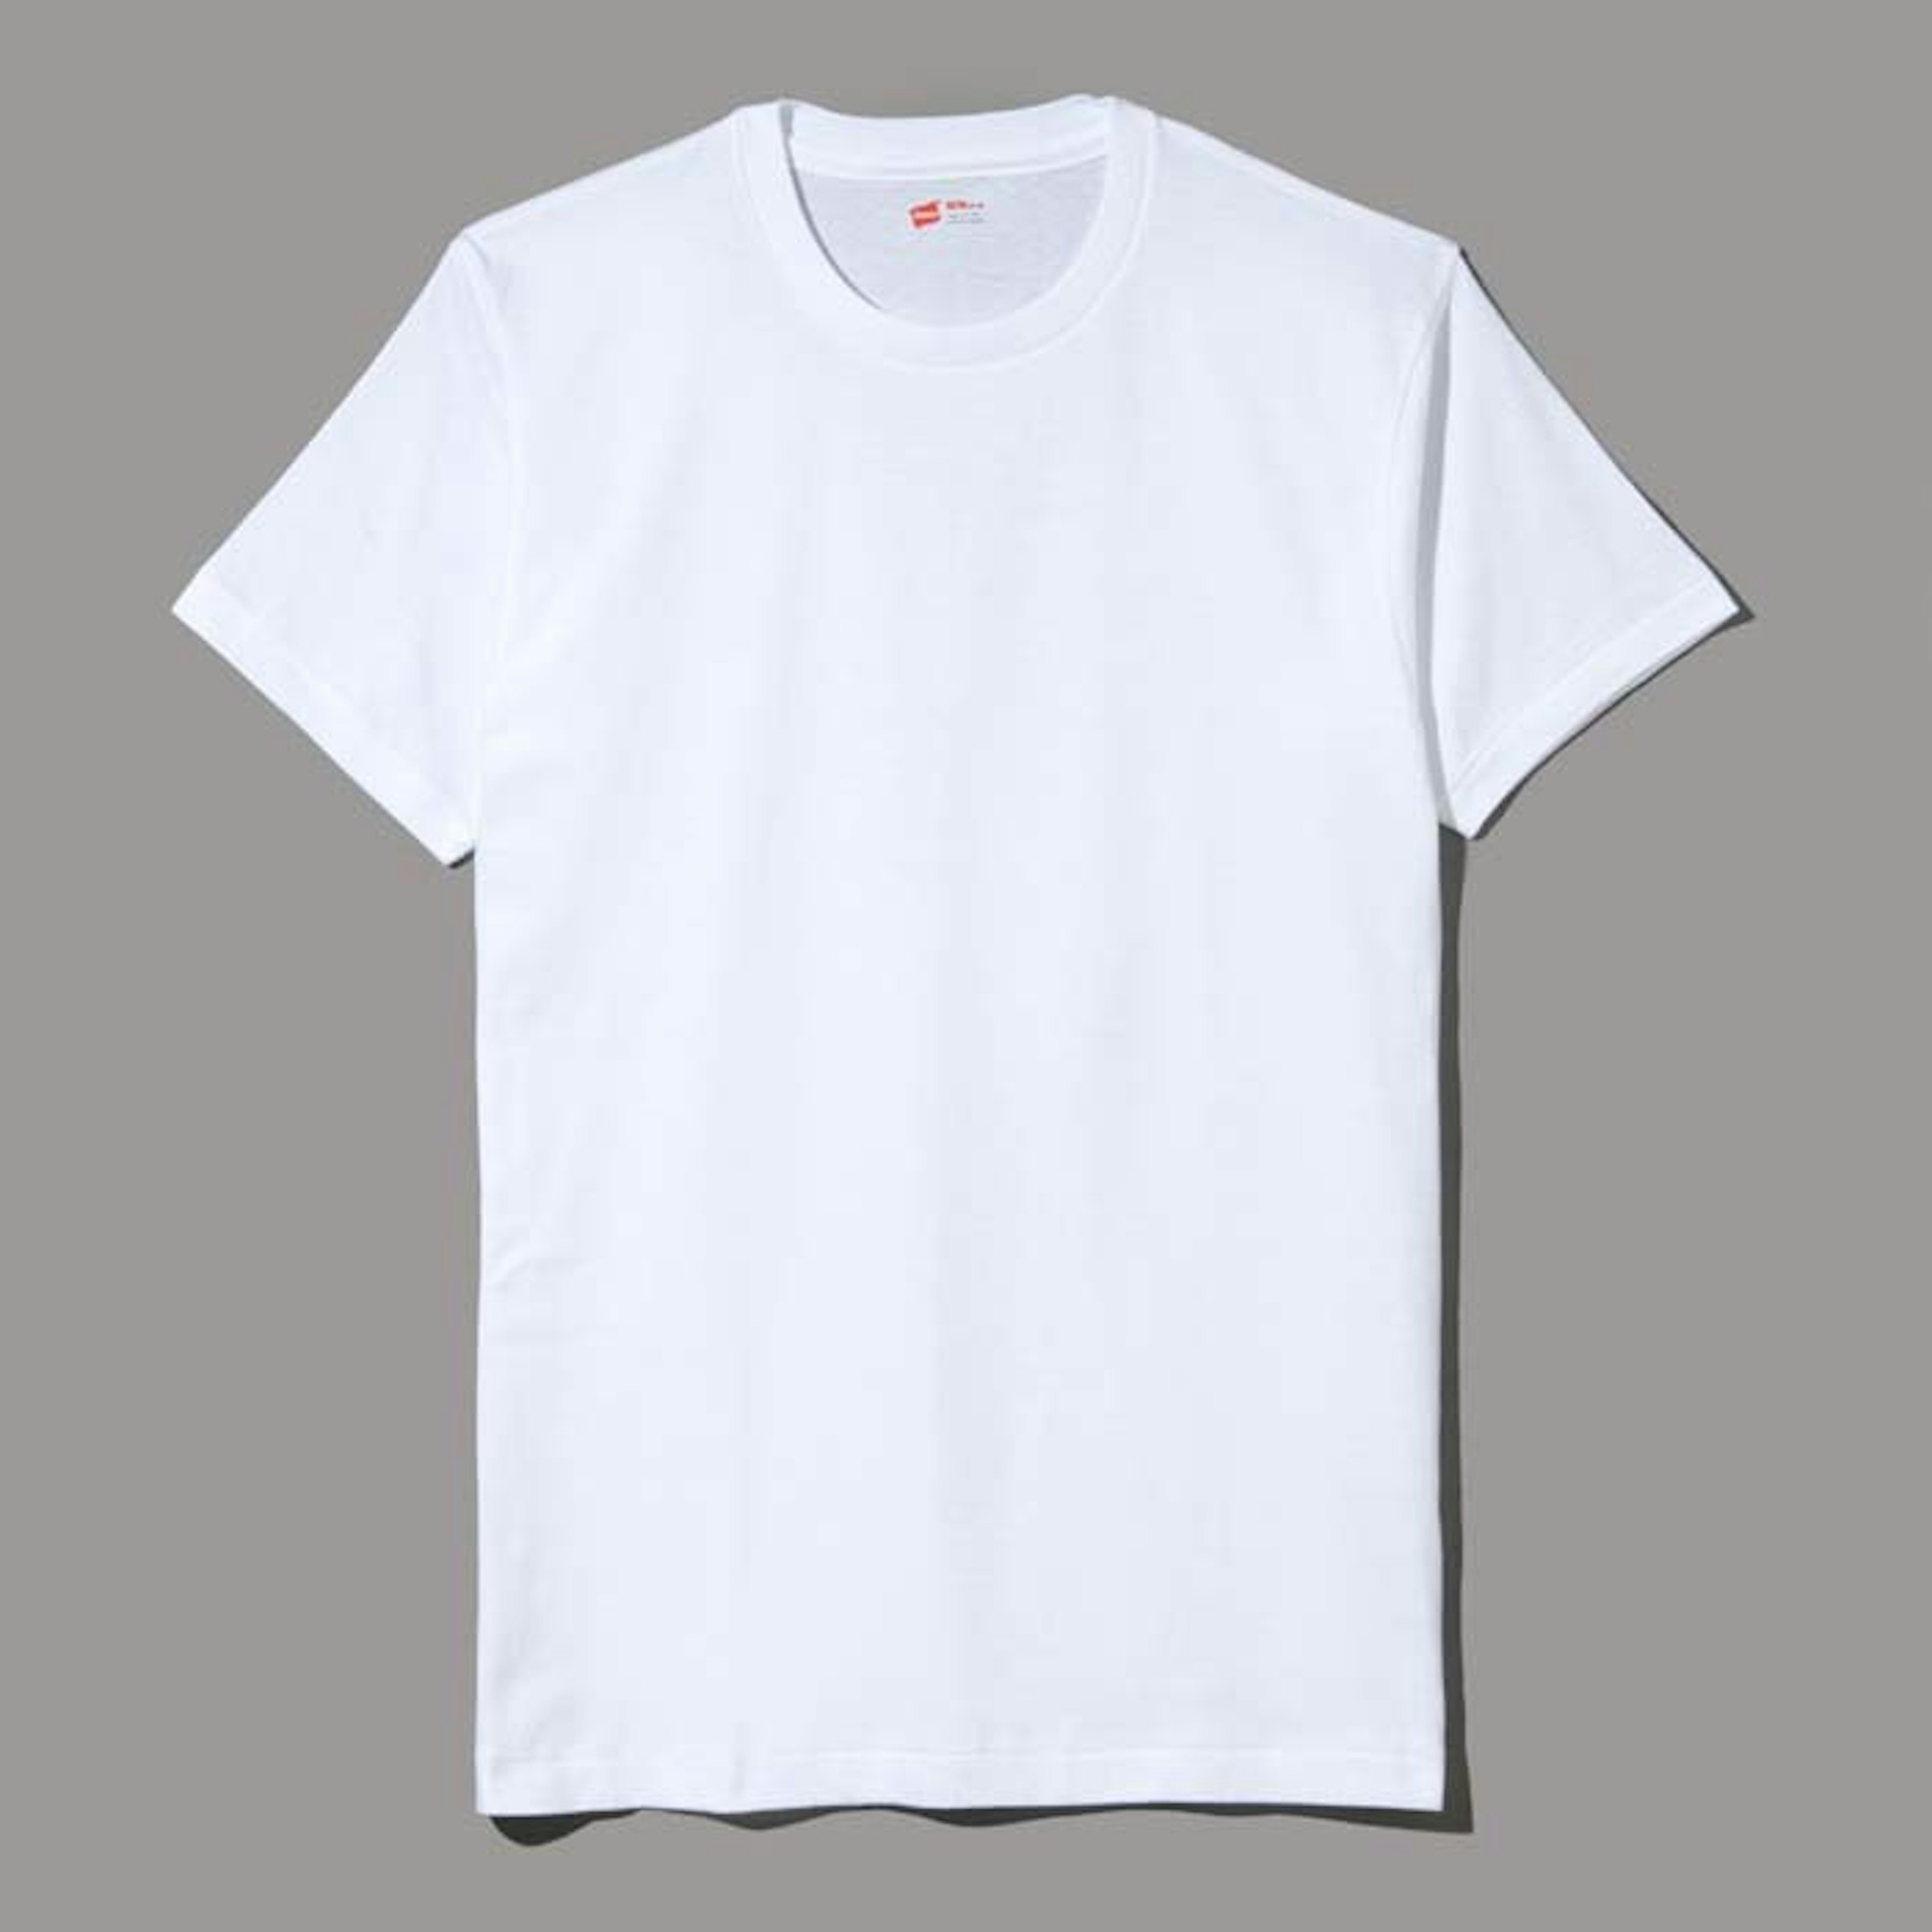 3P Red Label Crew Neck T-Shirt - 2,640 yen (tax included)